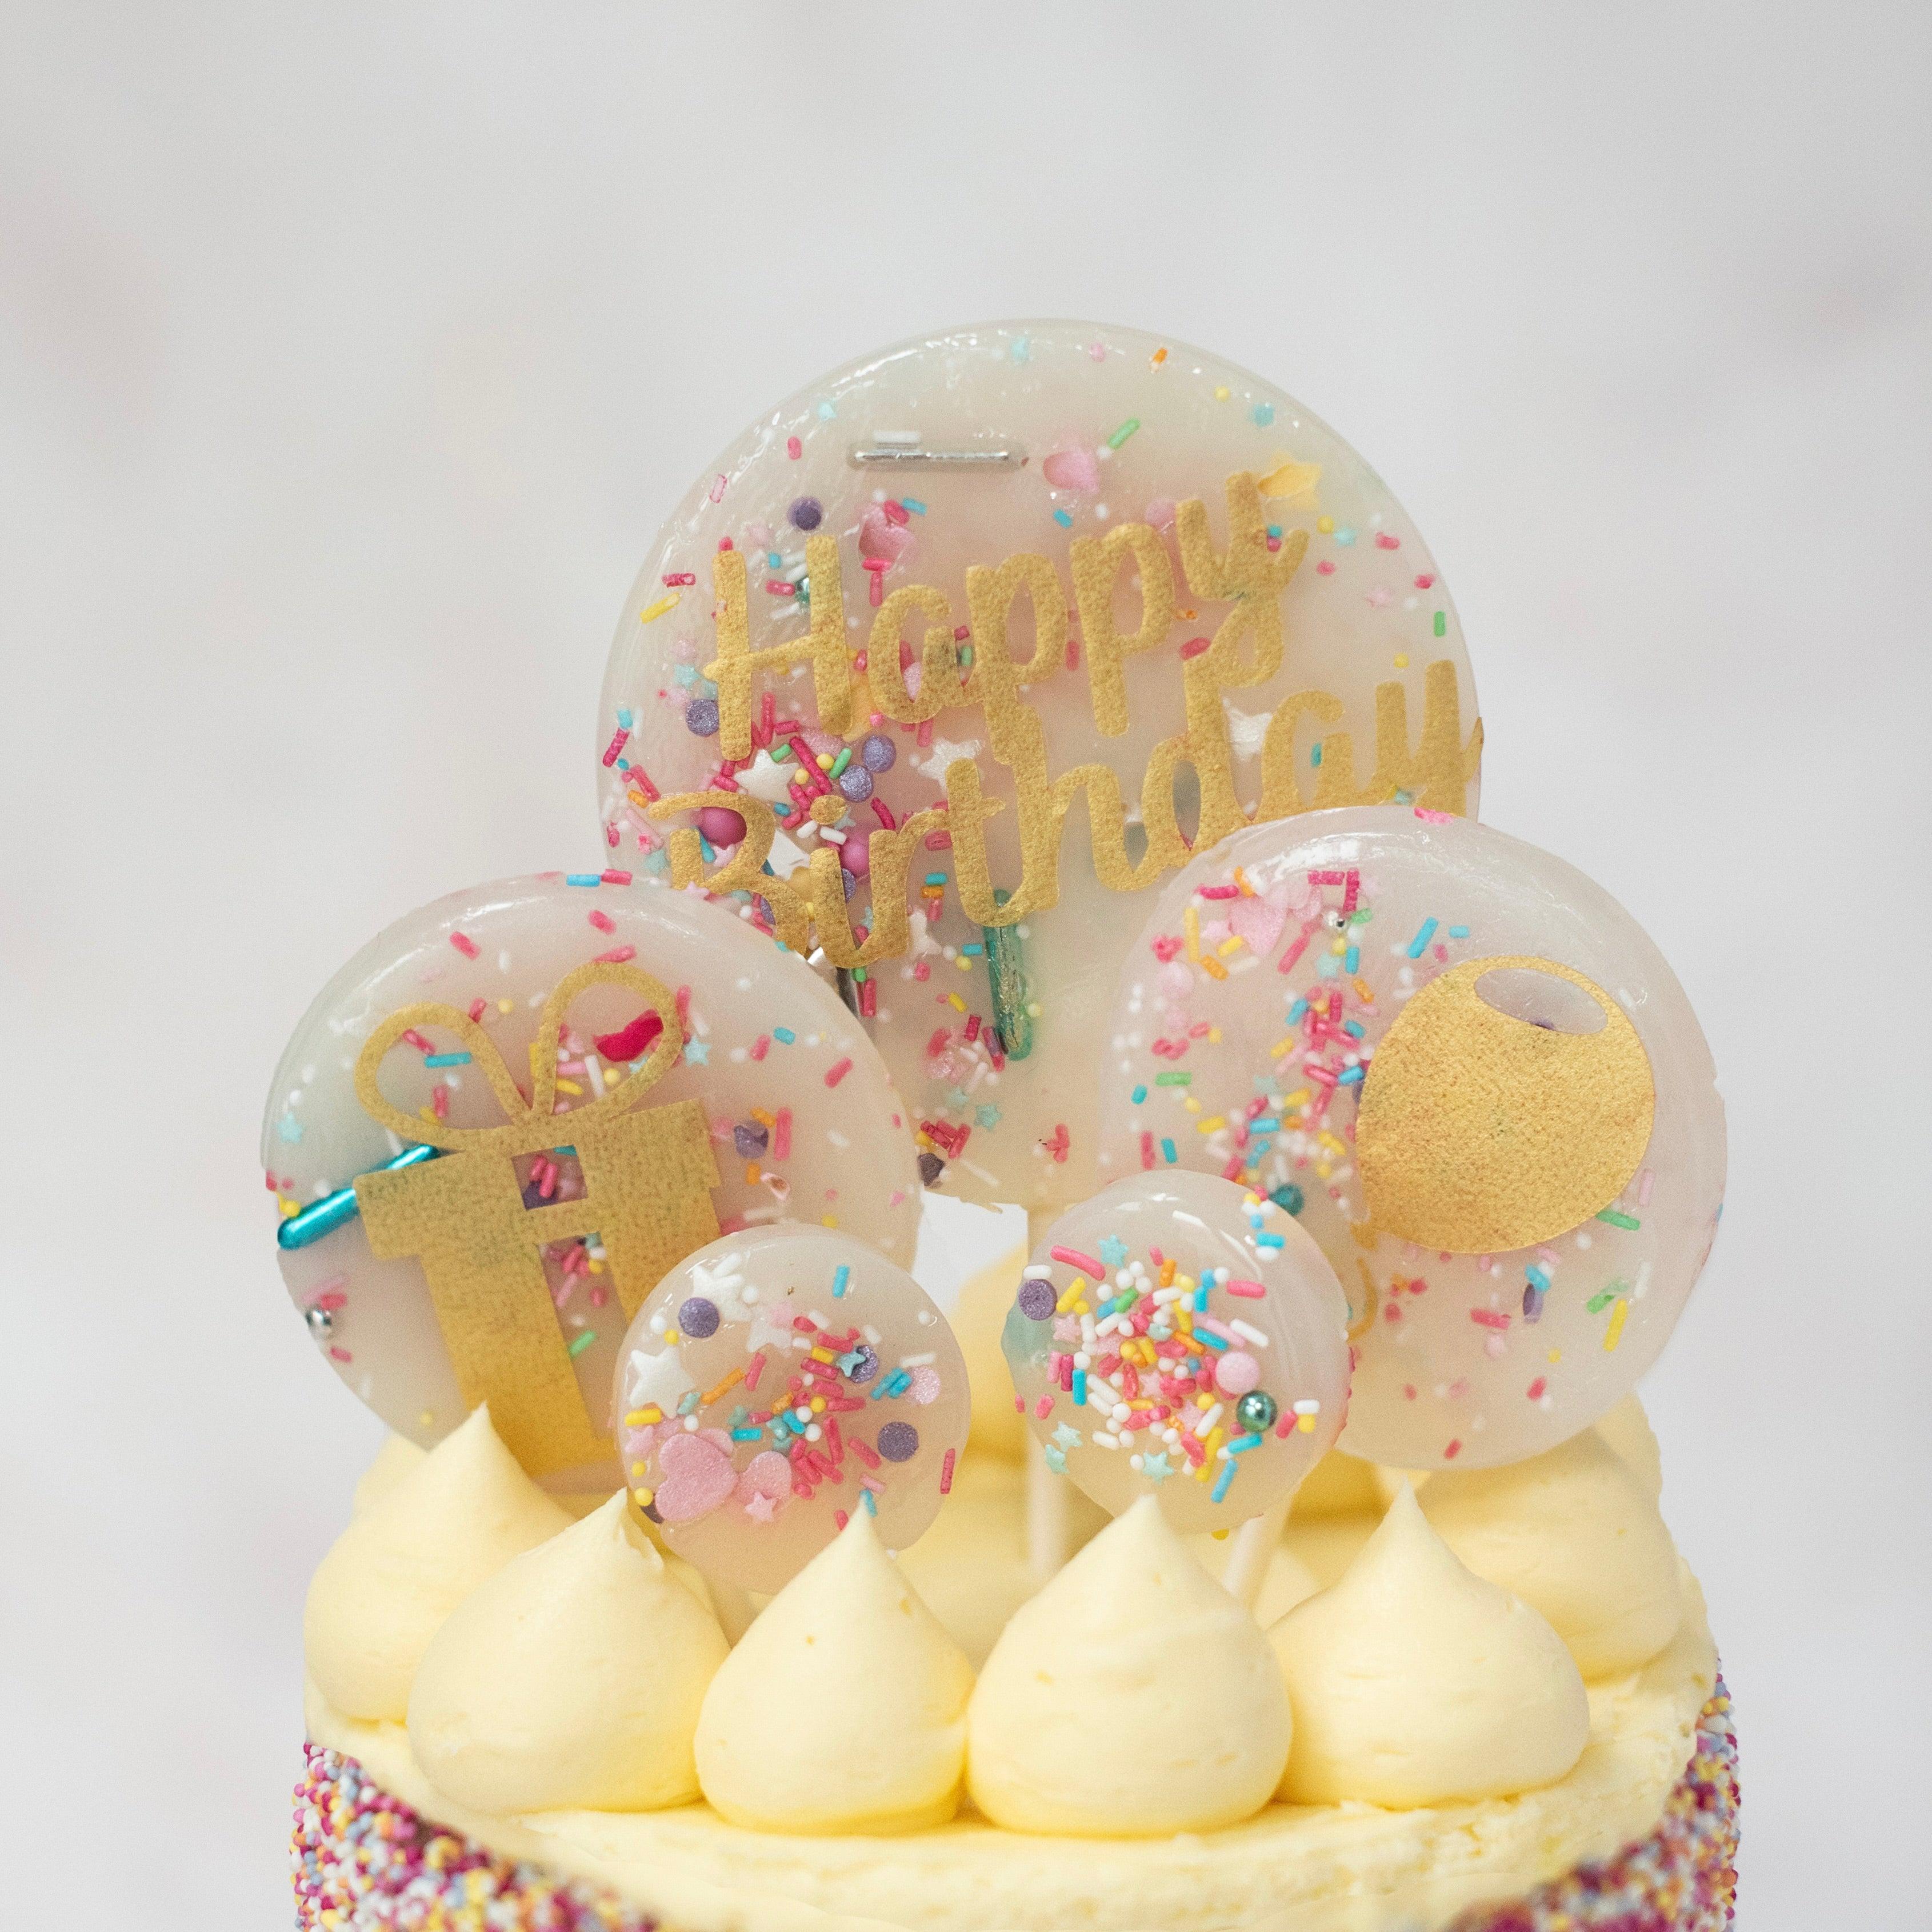 The Lollipop Cupcakes - Simply Cupcakes